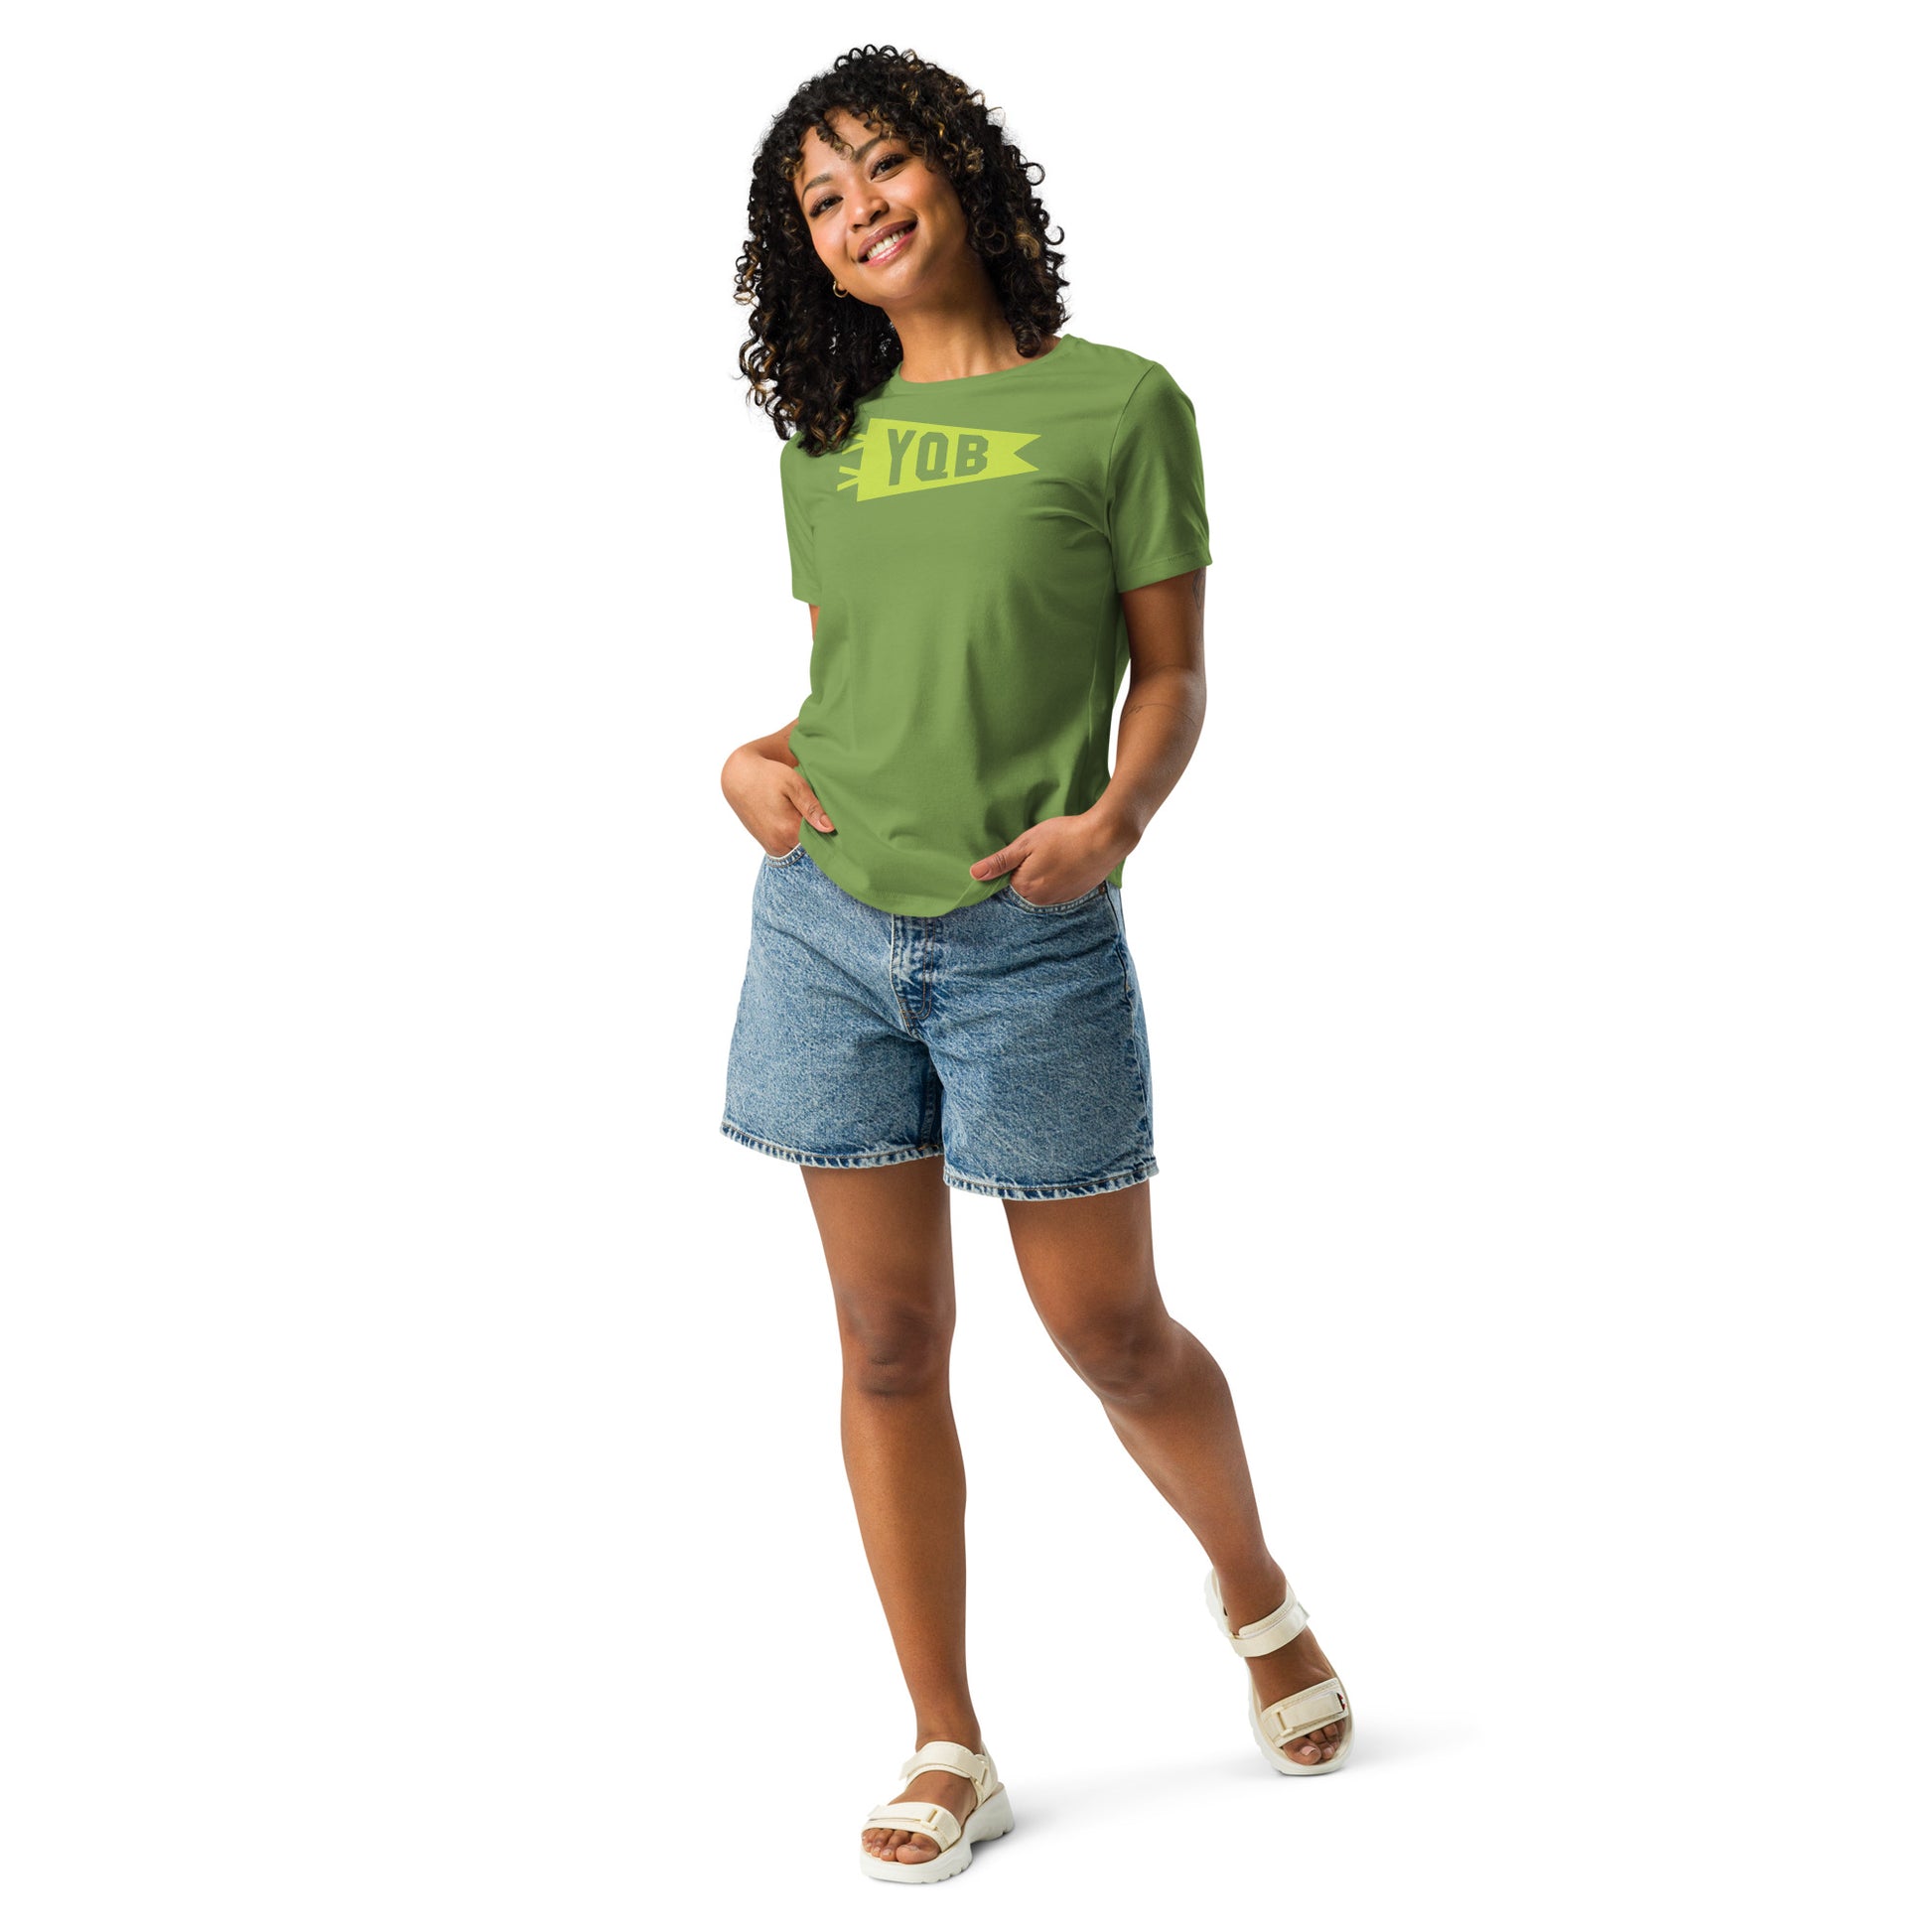 Airport Code Women's Tee - Green Graphic • YQB Quebec City • YHM Designs - Image 08